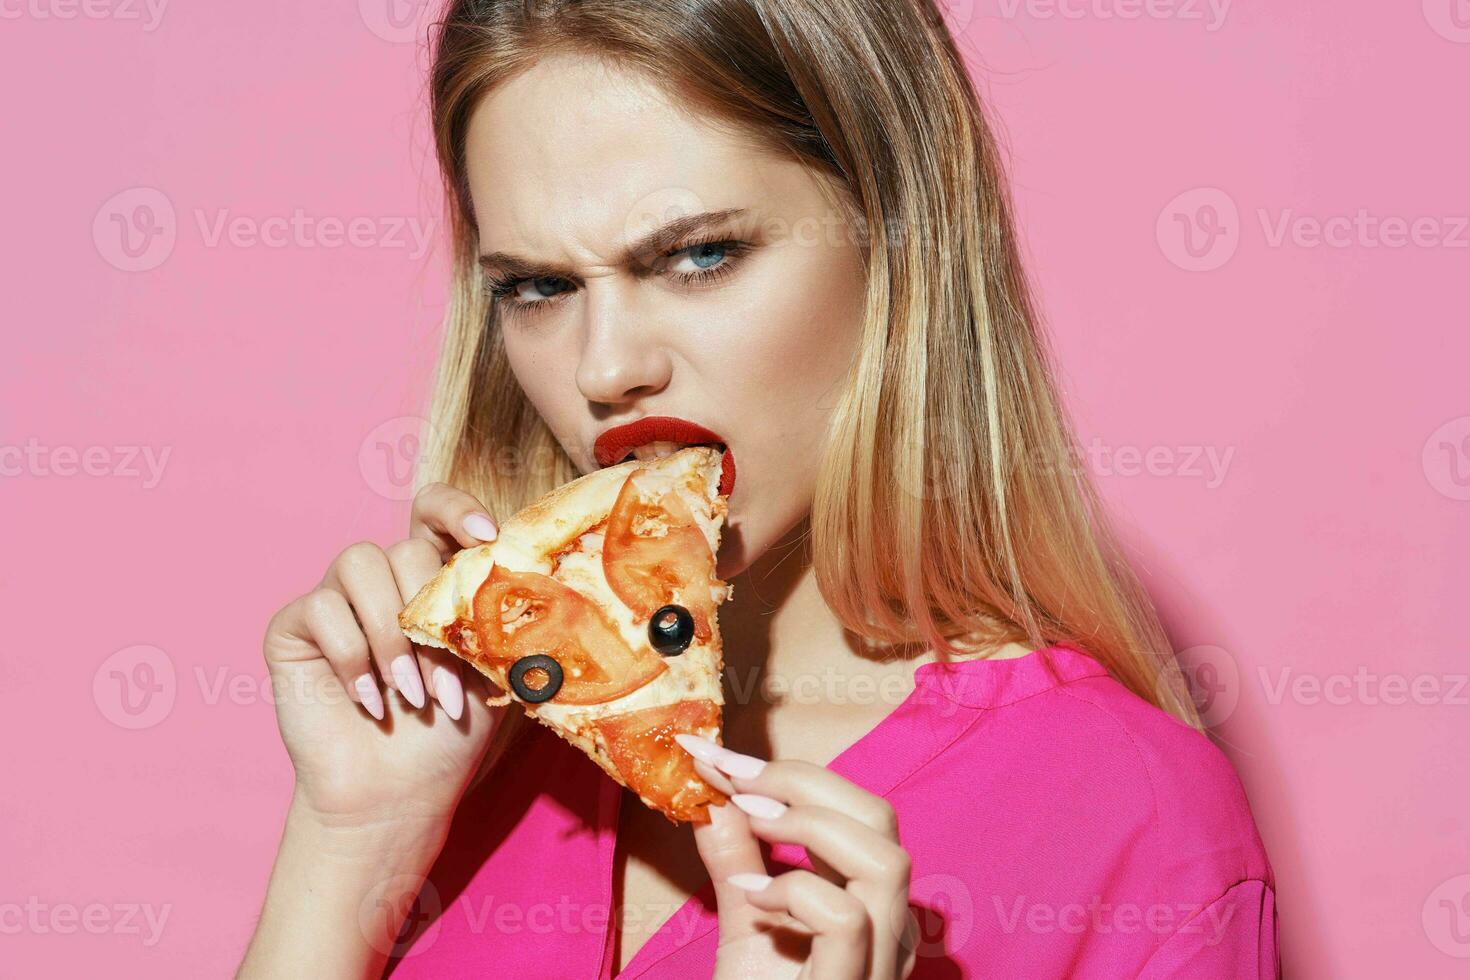 blonde eating pizza fast food pink background photo